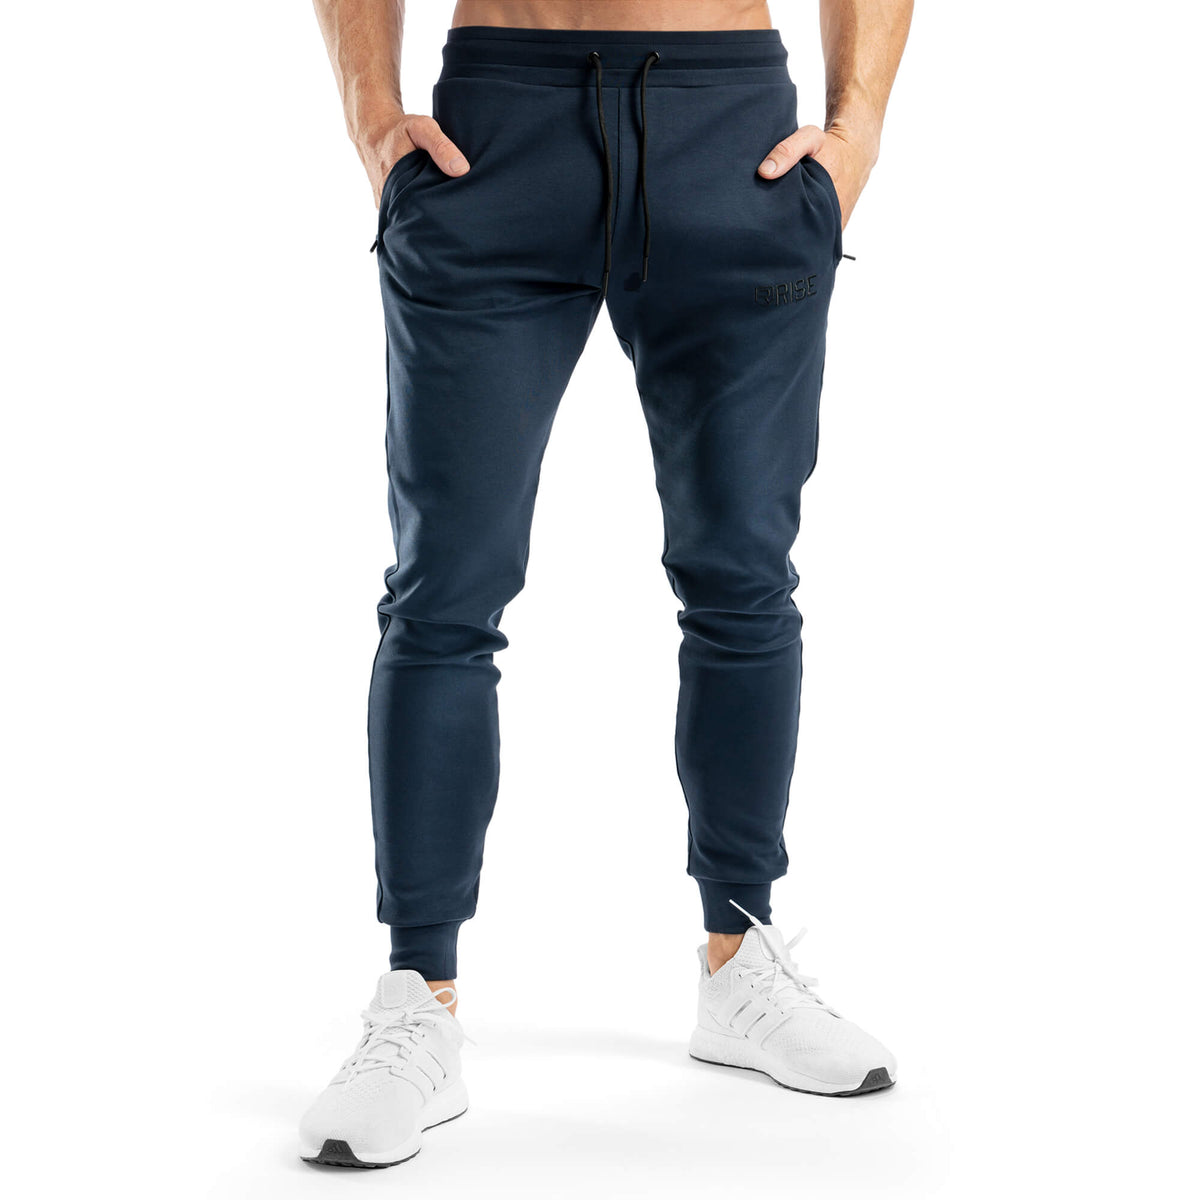 Athletic Bottoms 3.0 - Black - Rise Canada